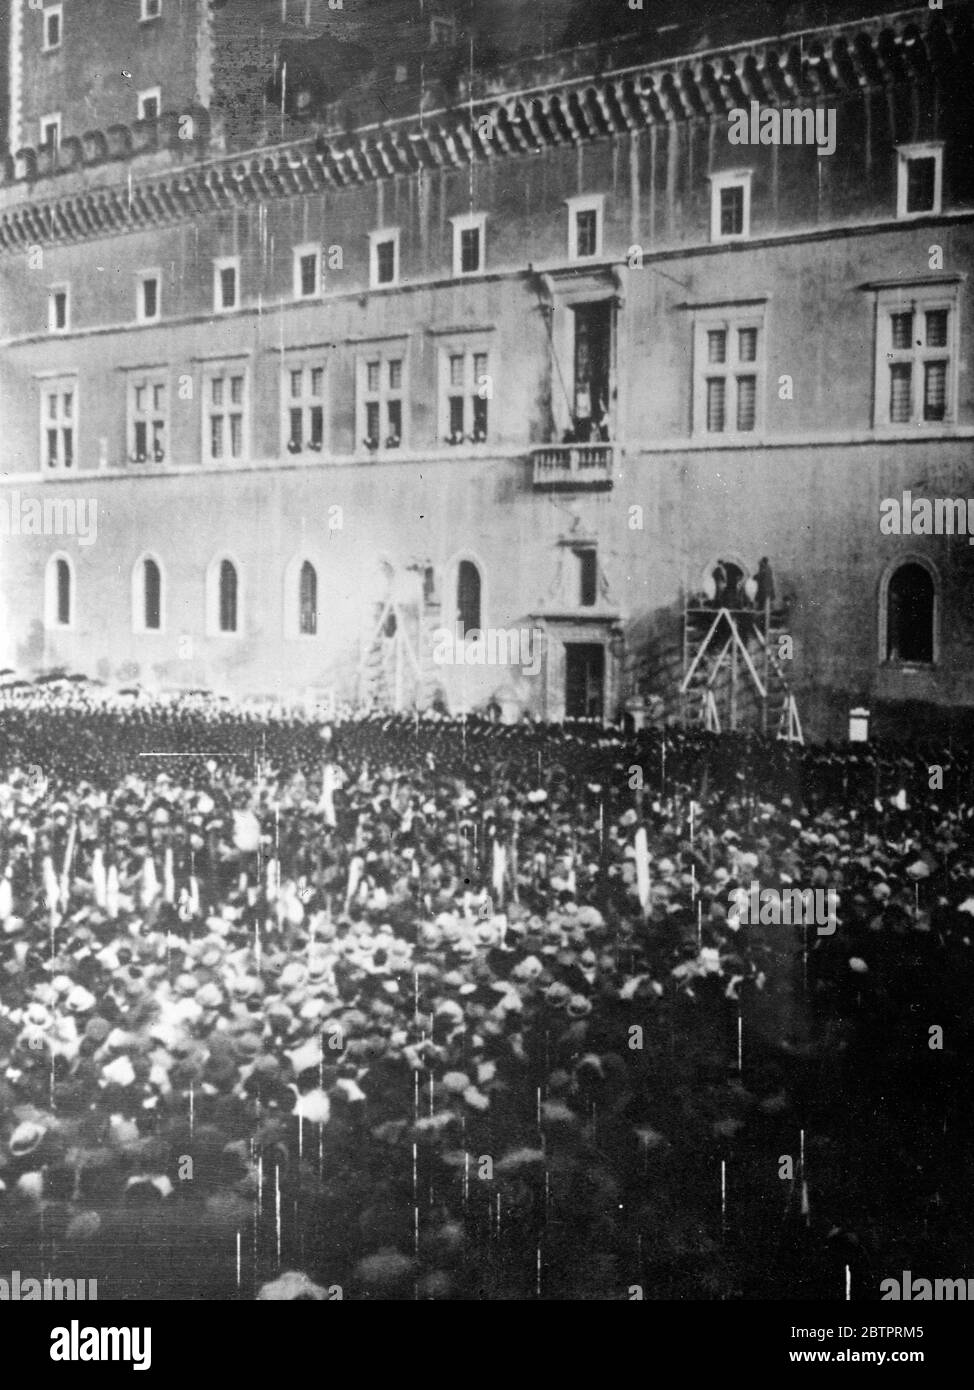 Italy leaves the League. Mussolini statement to frenzied crowd in Rome. Immediately after the Fascist Grand Council meeting, Signor Mussolini stepped on the balcony of the Palazzo Venezia in Rome and announced to a wildly cheering crowd that Italy was leaving the League of Nations. Nearly 100,000 Italians stood in the rain and cheered frenziedly. The speech was broadcast throughout Italy. Photo shows, the scene in the Piazza Venezia as Mussolini (on the balcony of the Palazzo Venezio) announced the decision to leave the League of Nations to the crowd standing in the rain. 12 December 1937 Stock Photo